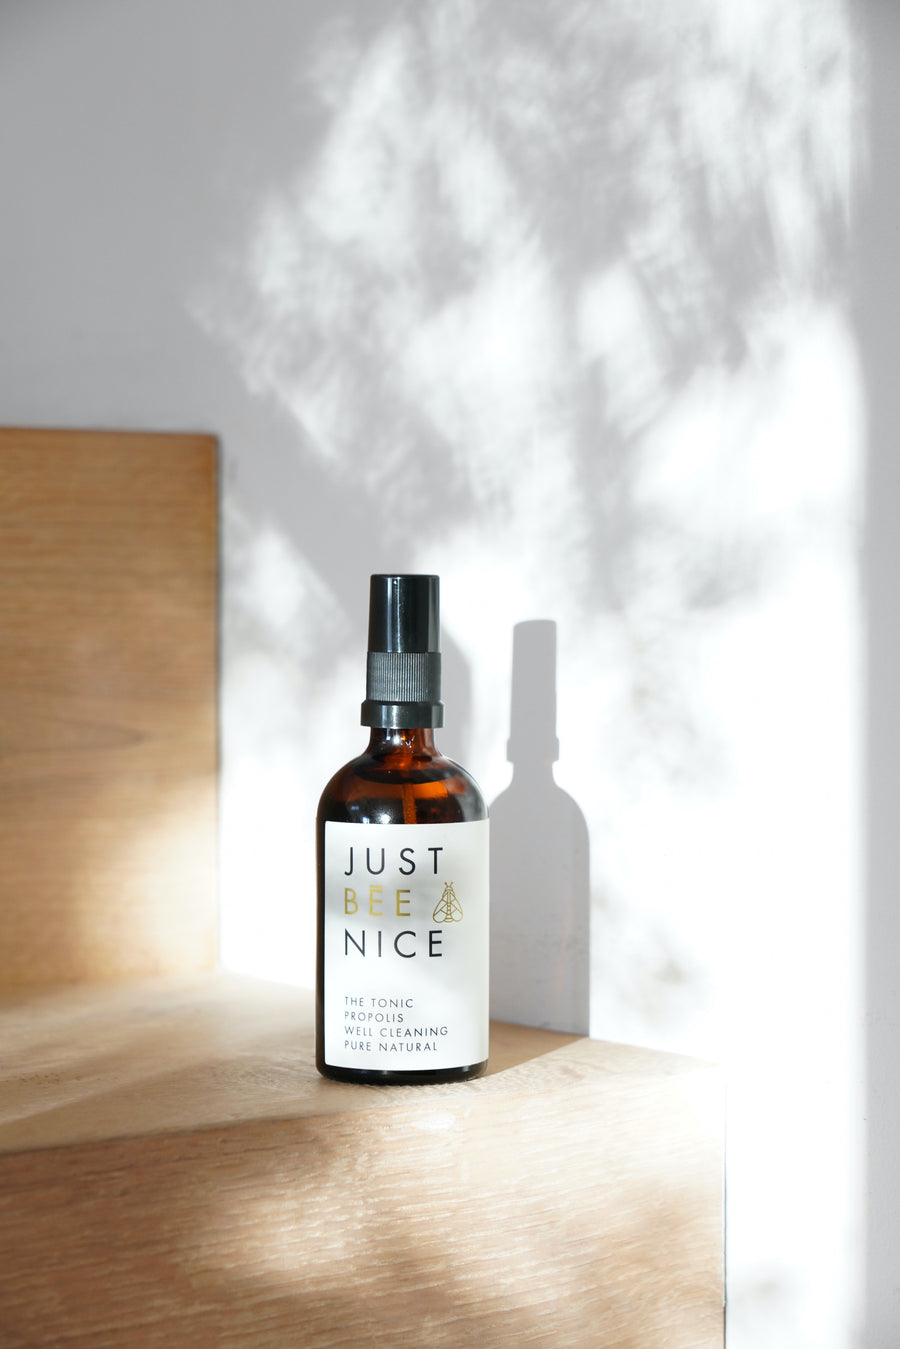 THE TONIC 100 ml in der Glasflasche